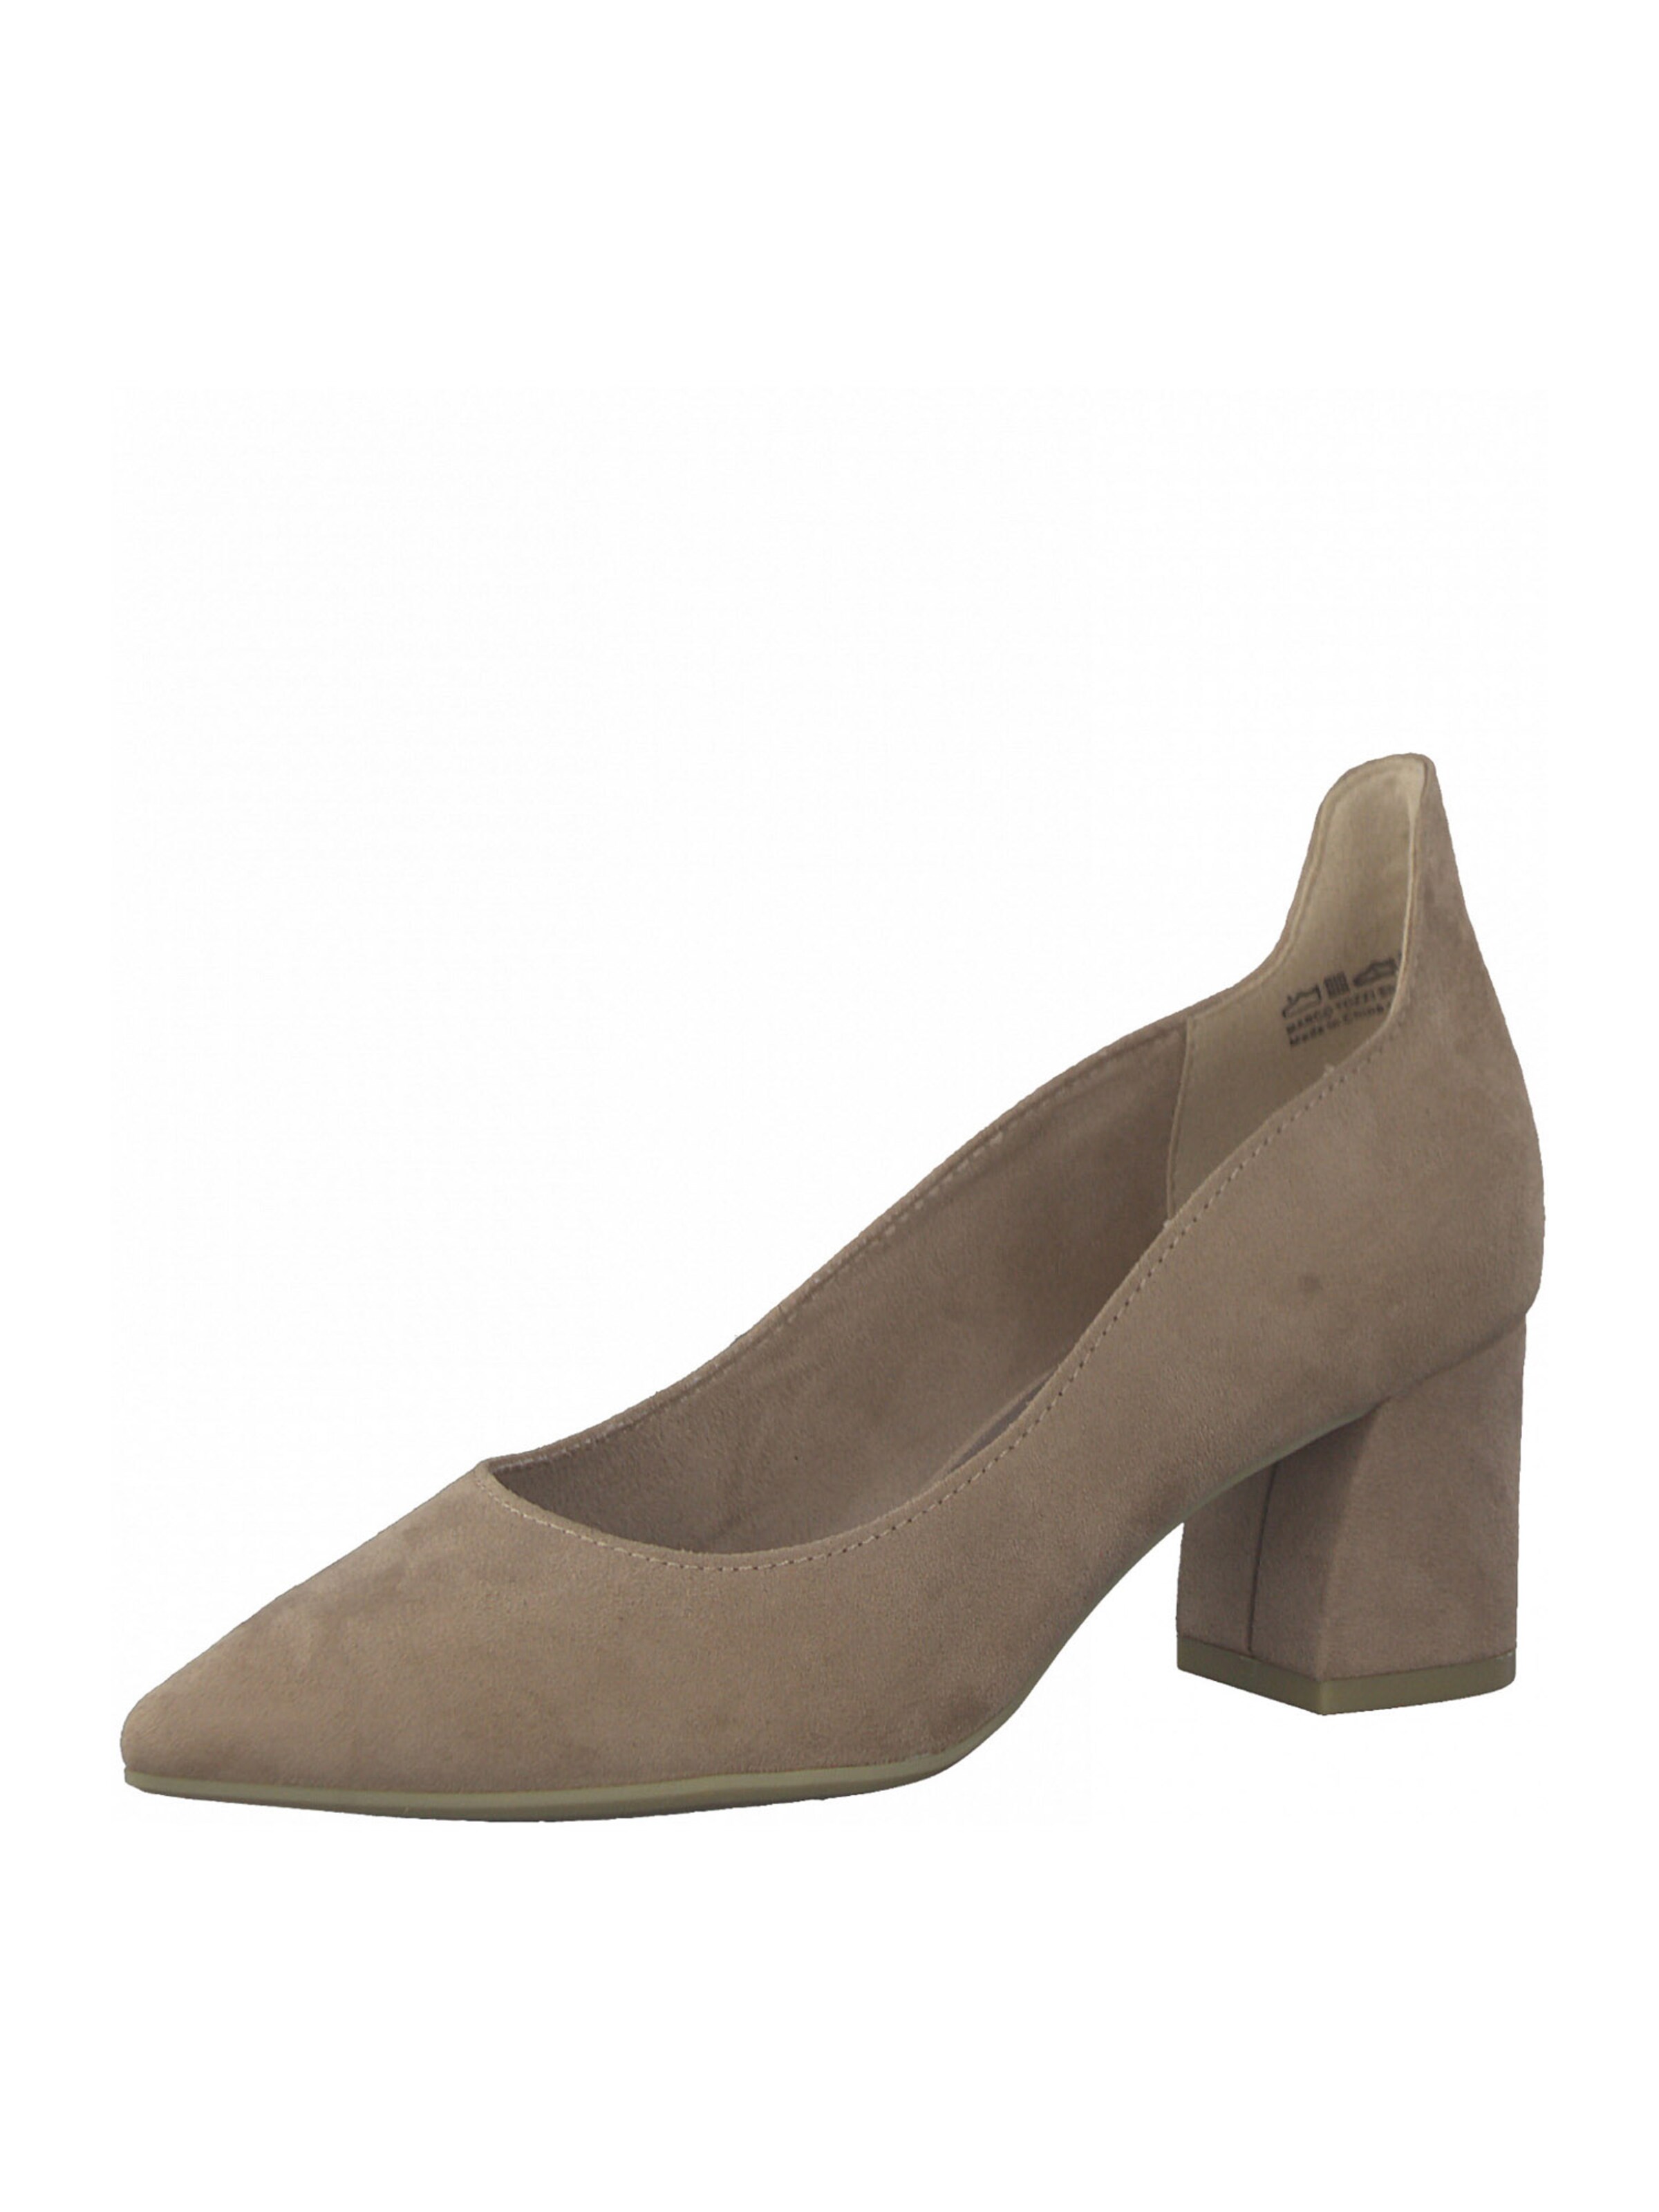 Marco Tozzi High-Front Pumps brown business style Shoes Pumps High-Front Pumps 